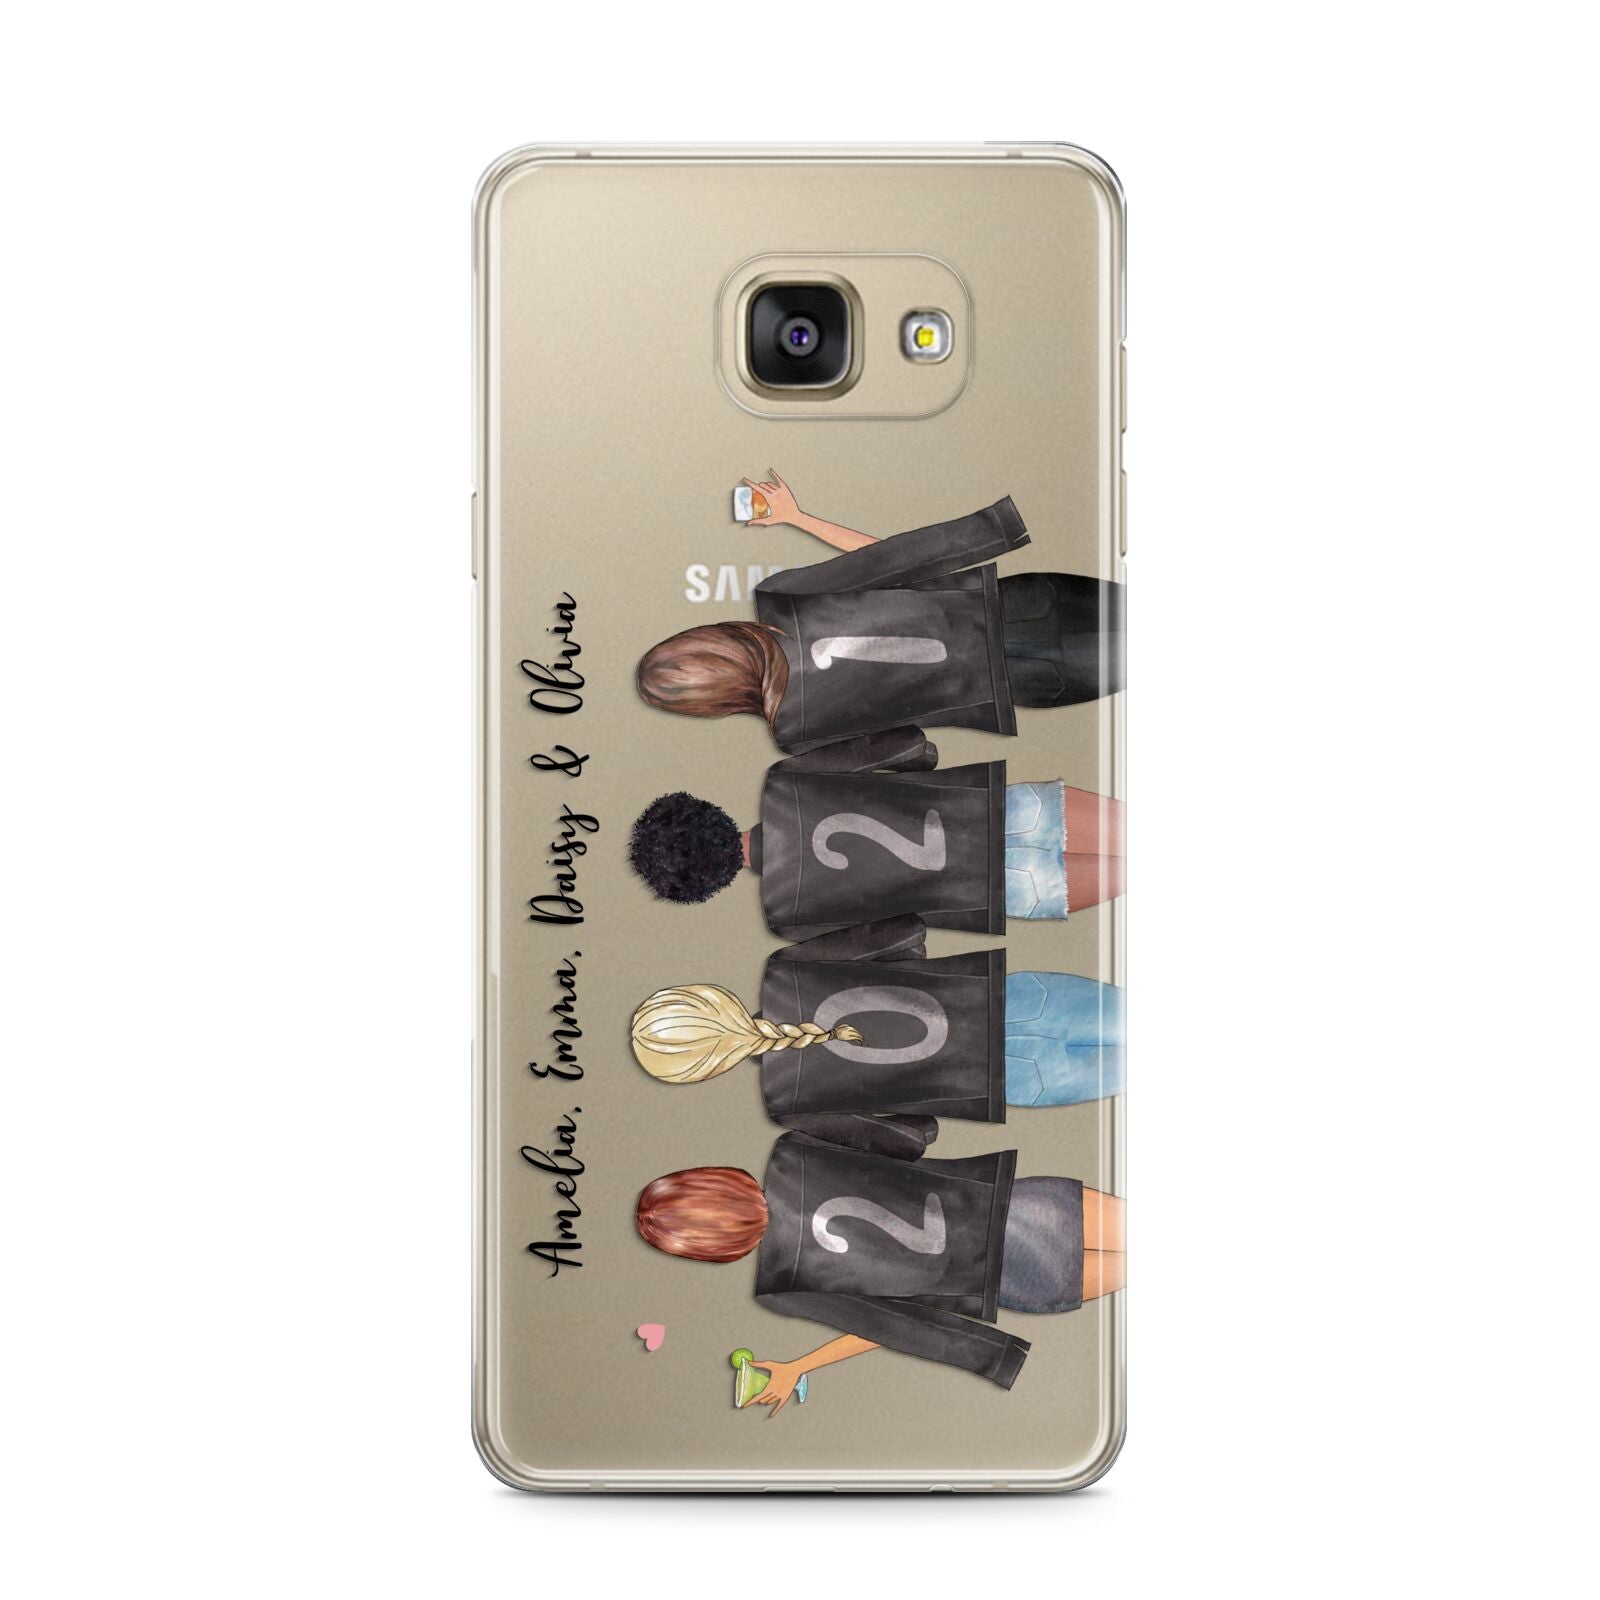 4 Best Friends with Names Samsung Galaxy A7 2016 Case on gold phone